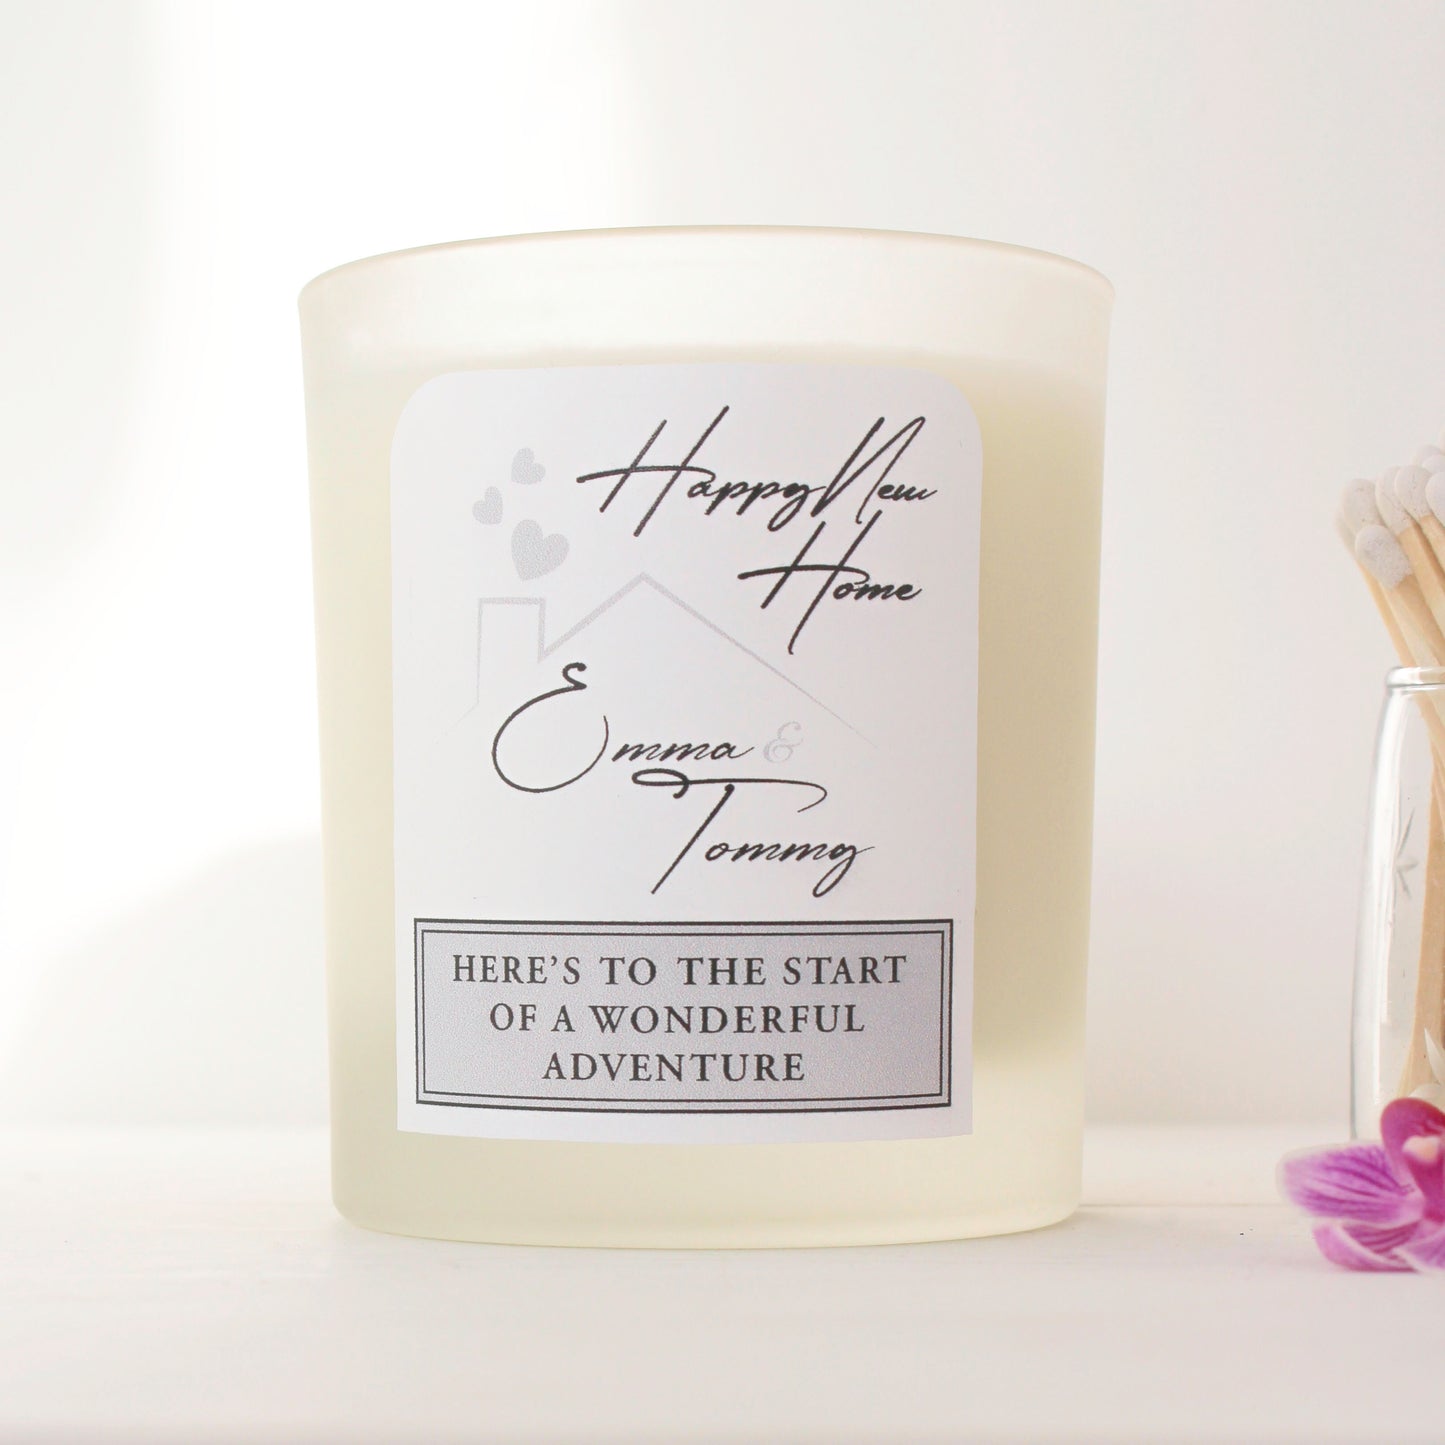 Happy New Home - Scented Candle - 220g